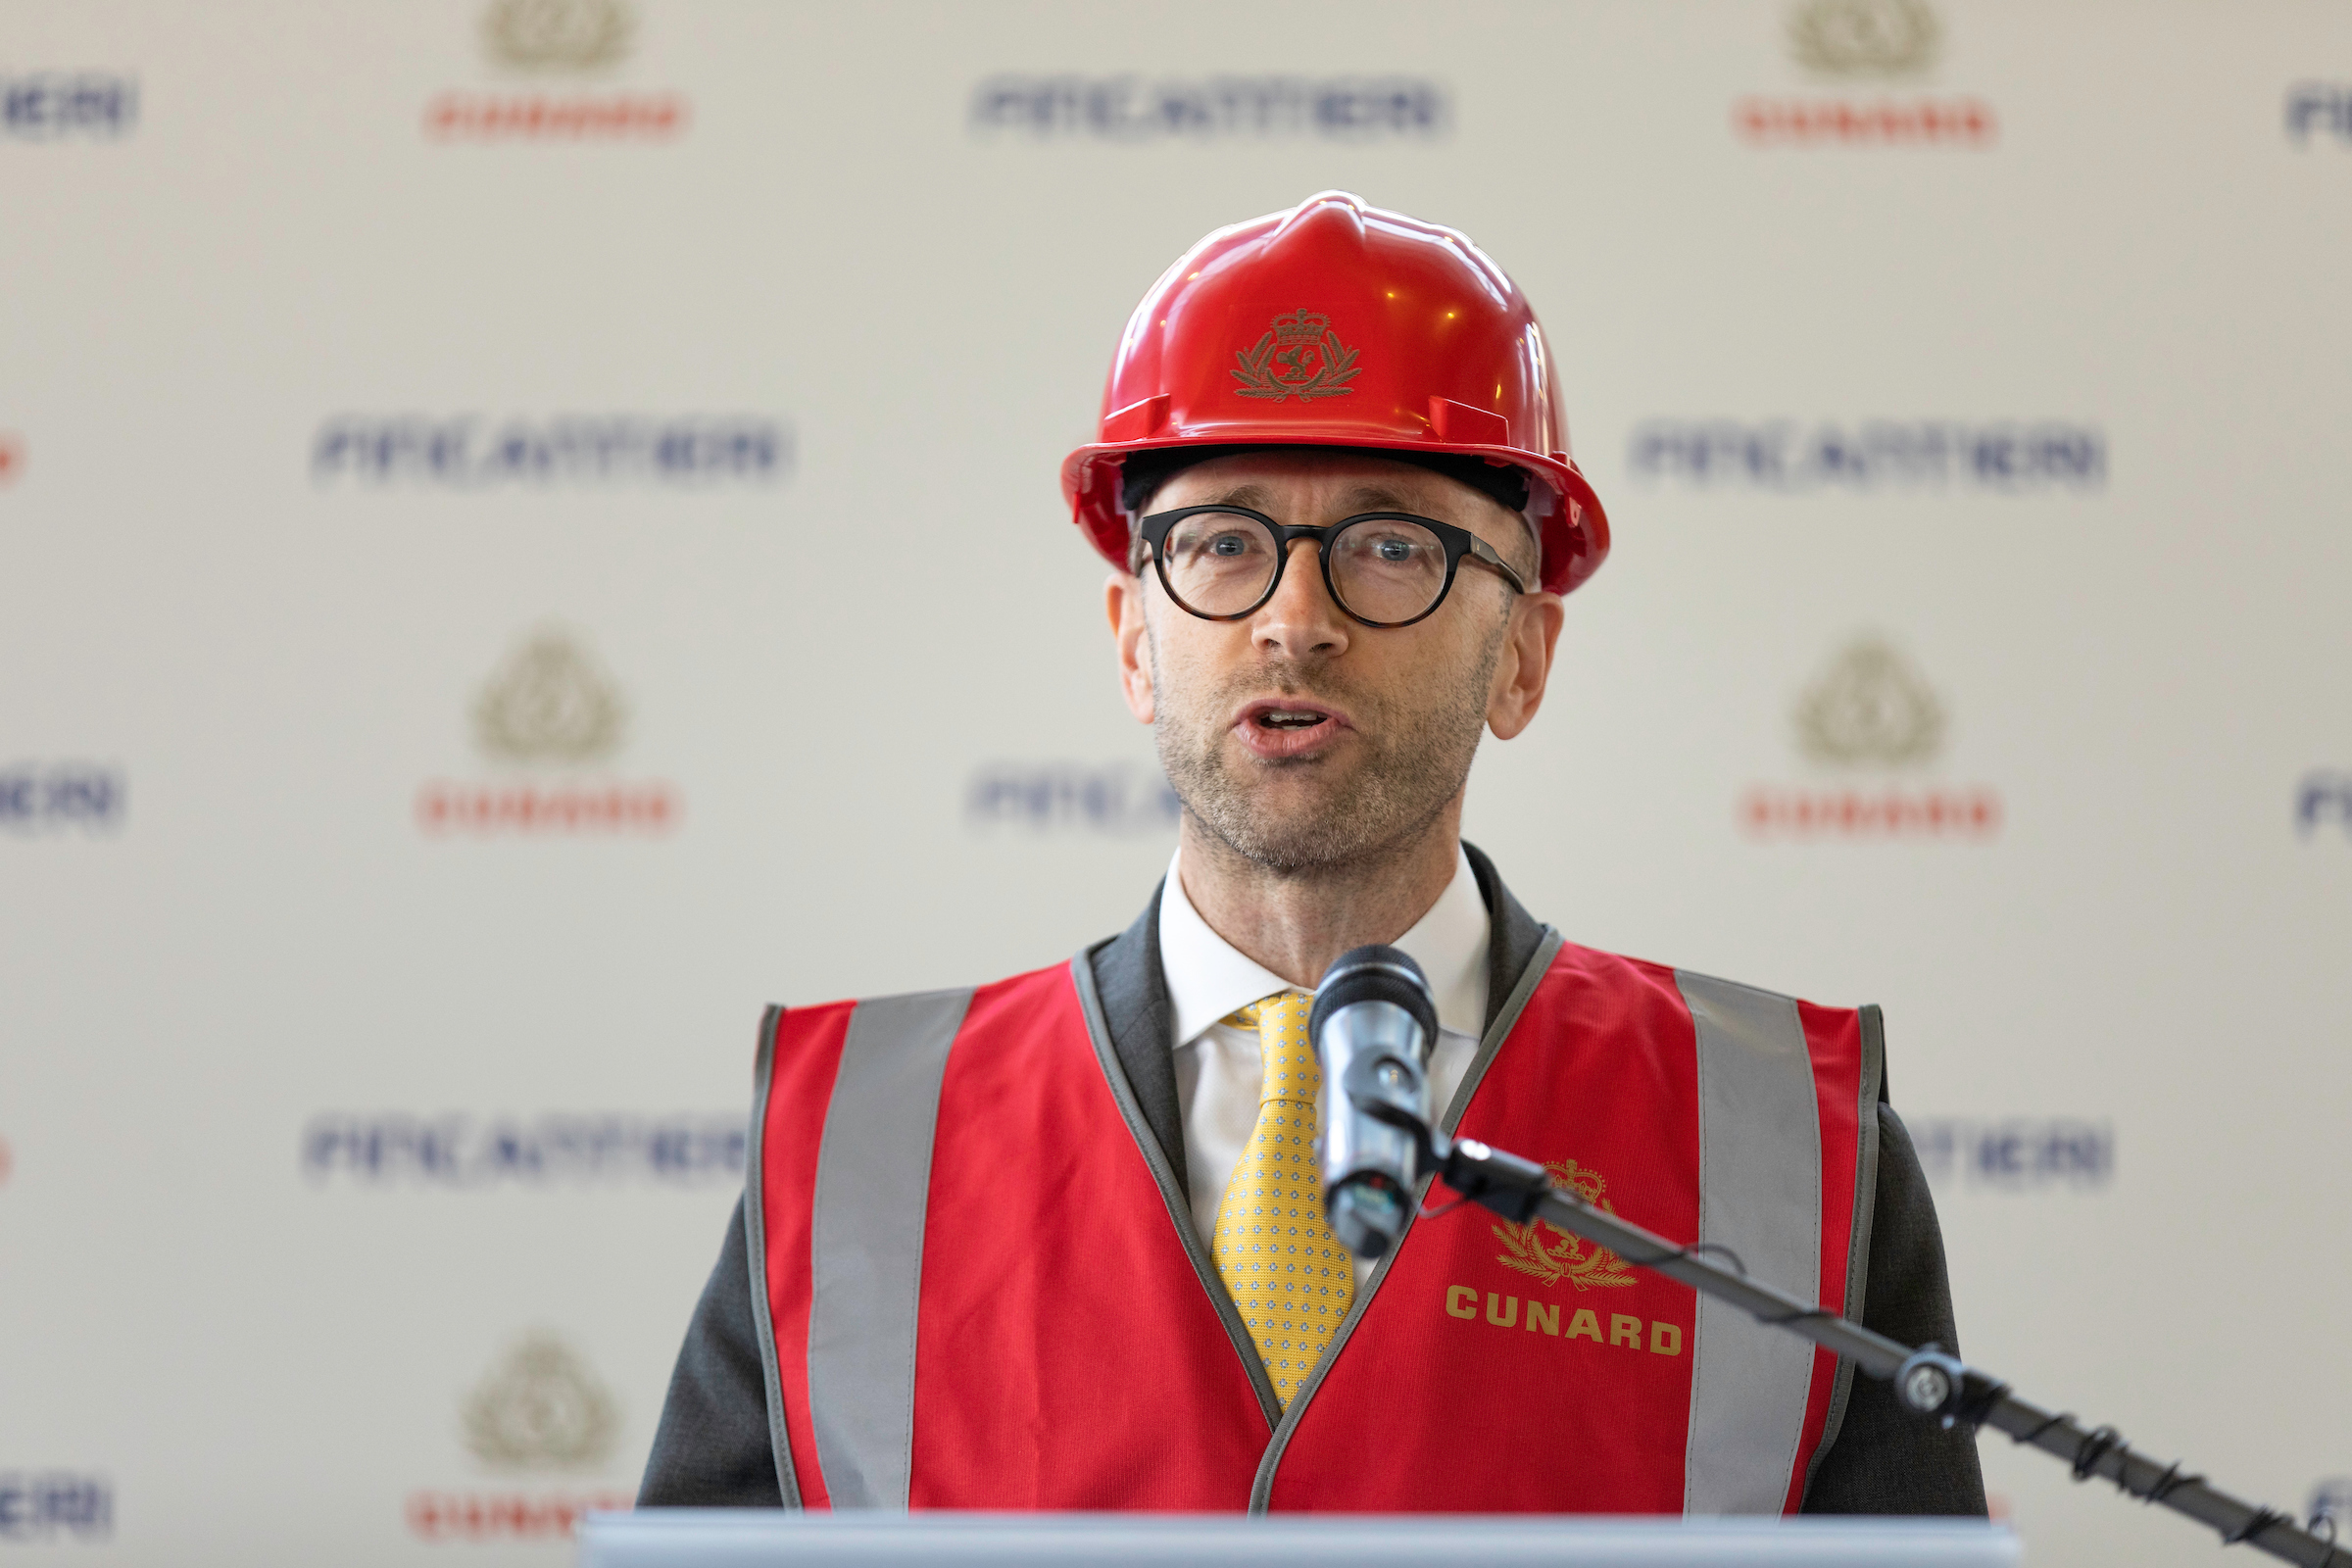 EDITORIAL FREE TO USE IMAGE - Simon Palethorpe, President of Cunard speaking at the Fincantieri ship yard in Naples, Italy where Cunard has cut the first steel of their new, as yet un-named, ship which will launch in 2022. The start of construction on the 249th ship of the luxury cruise line, marks an exciting moment in the companys 179-year history. Cunard's fleet includes Queen Mary 2, the world's only ocean liner in service, plus Queen Elizabeth and Queen Victoria. Picture date: Friday October 11, 2019. Photograph by Christopher Ison © 07544044177 chris@christopherison.com www.christopherison.com